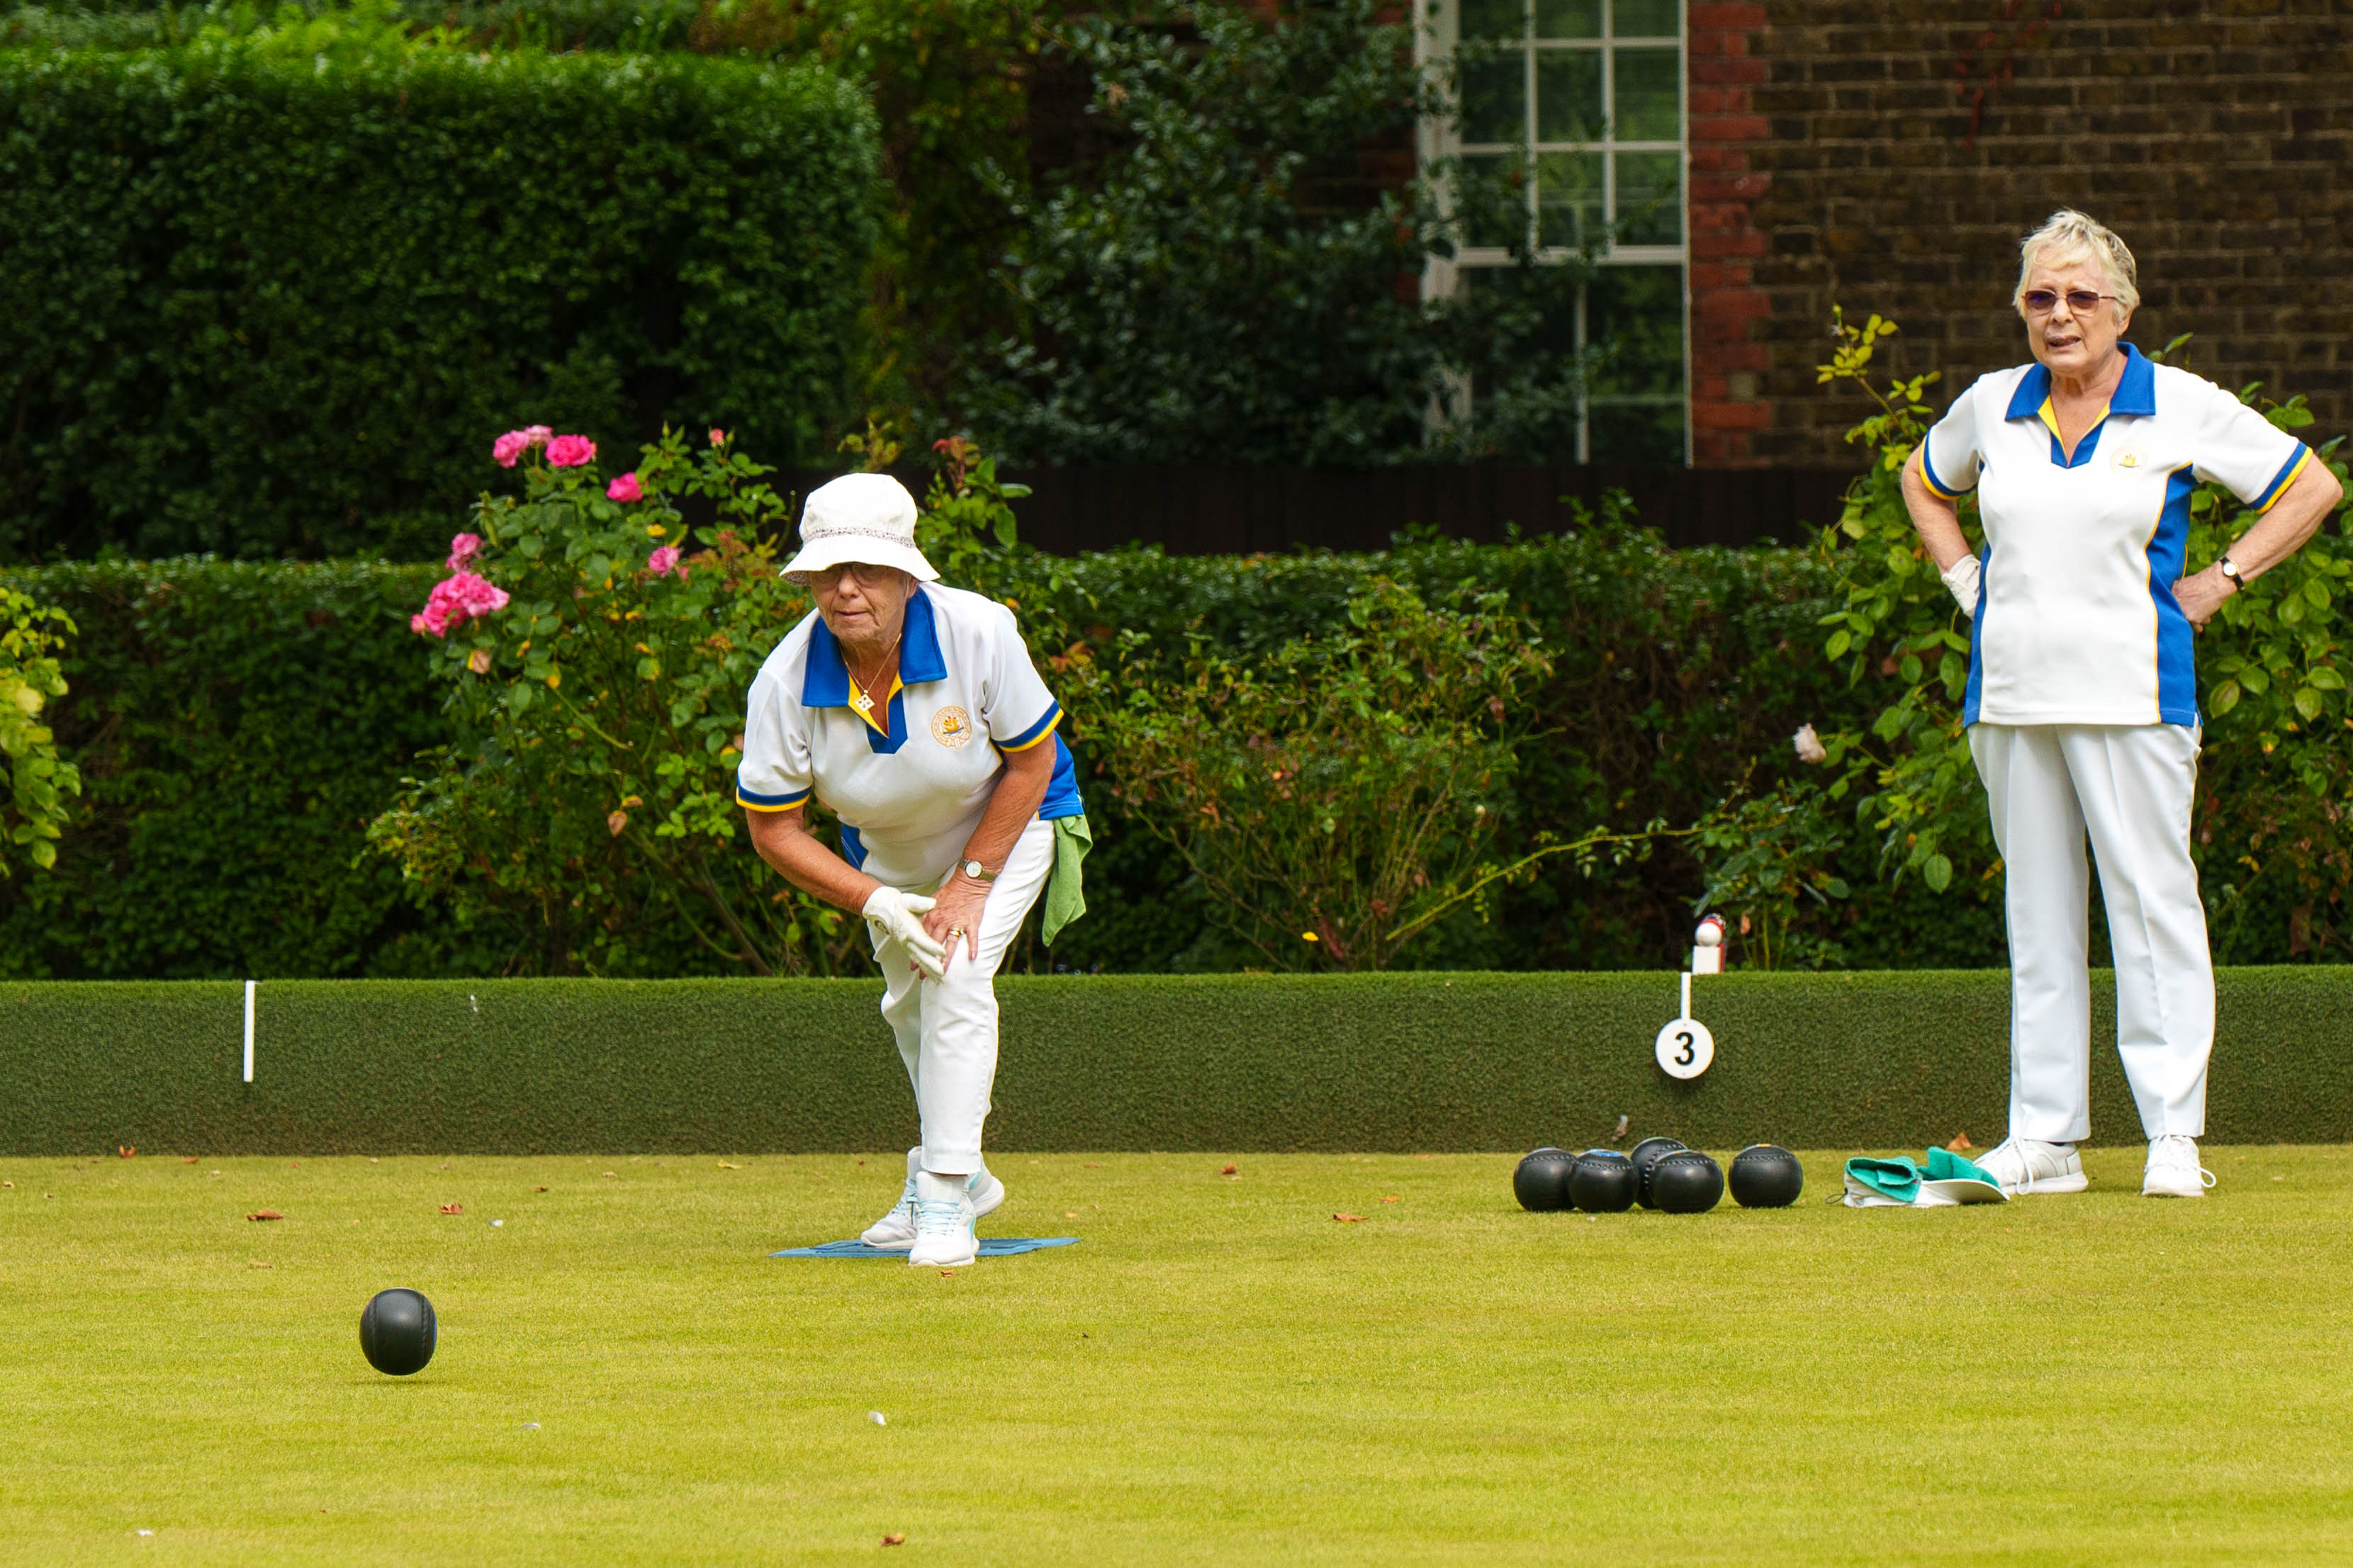 Francis Drake Bowls Club, Hilly Fields, Brockley, SE4 1QE. Presidents Cup